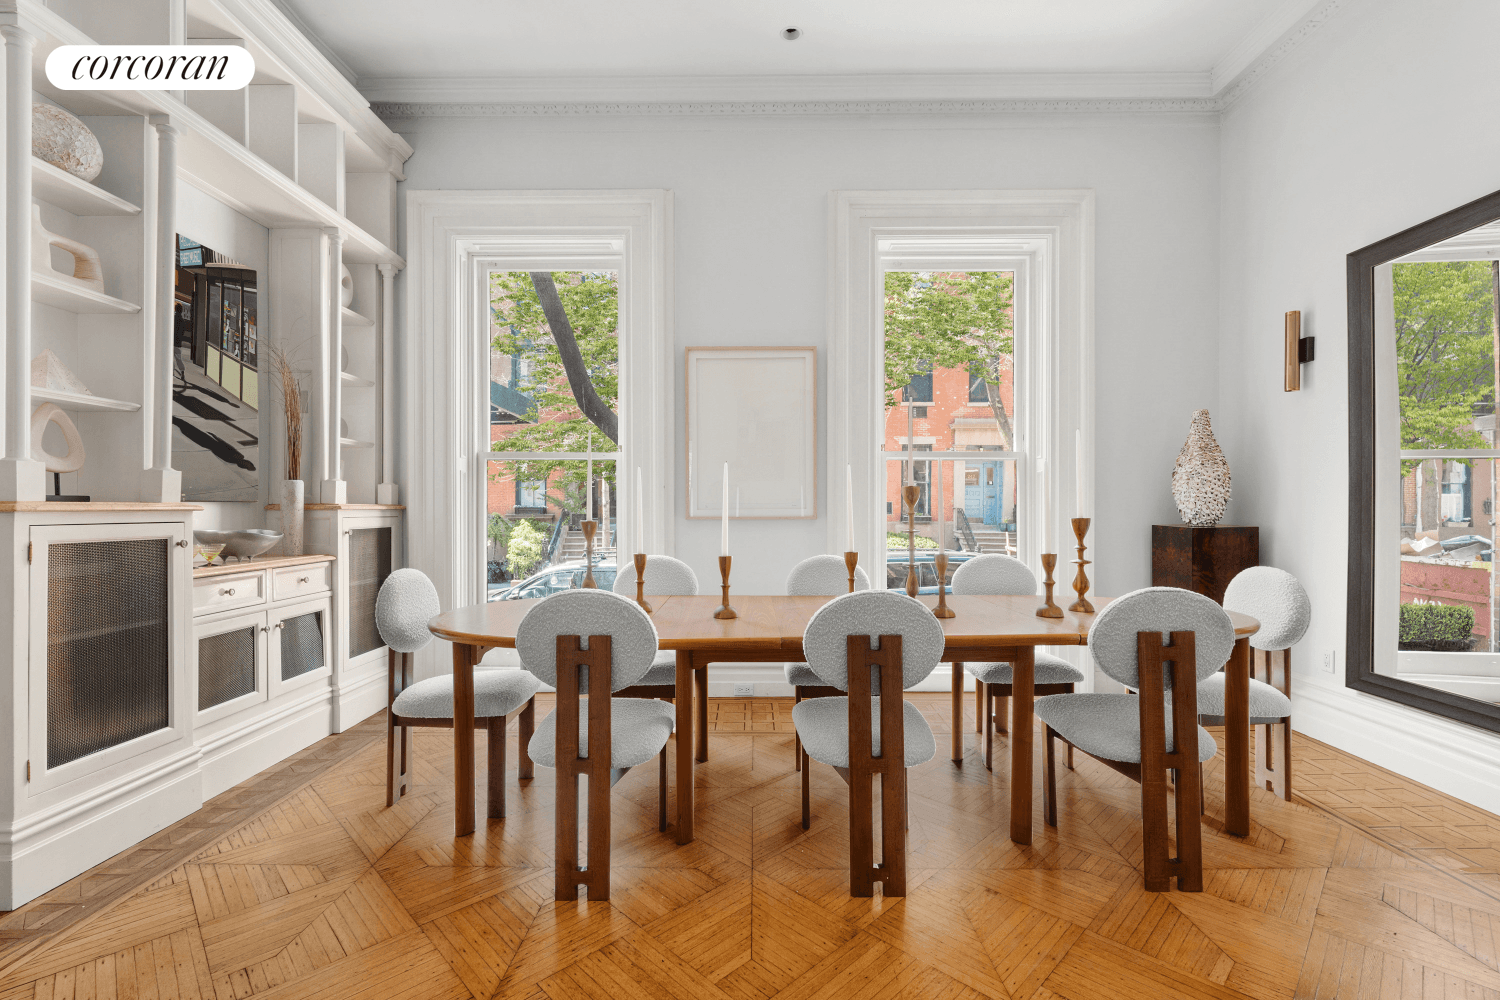 Welcome to 257 Henry Street in the heart of Brooklyn Heights, an impressive 26.